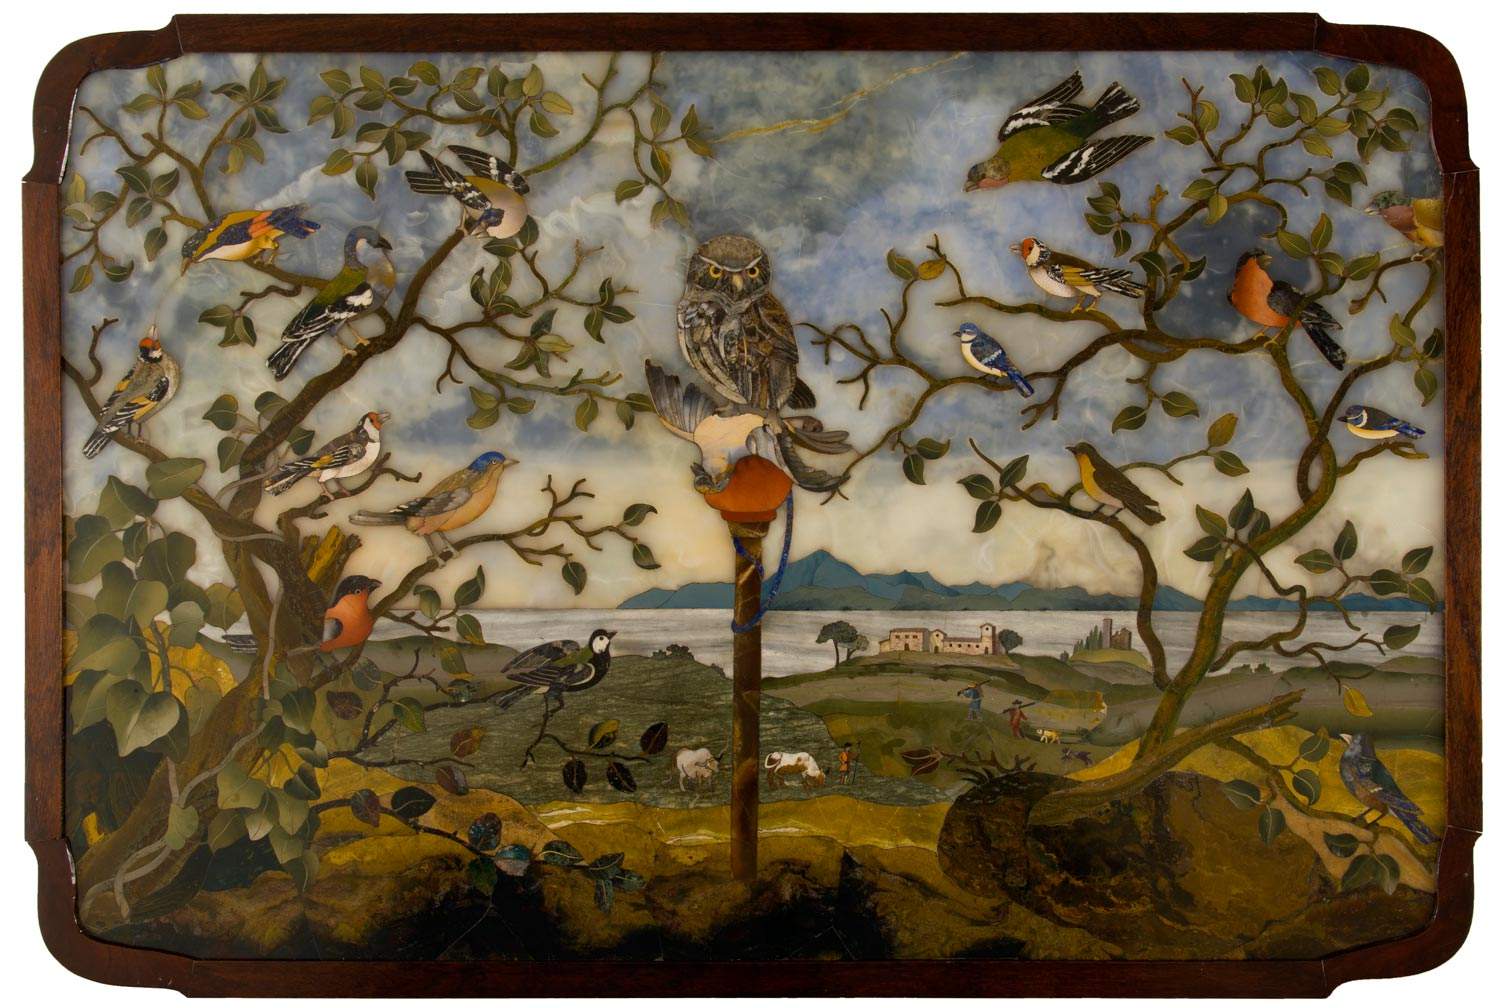 The Museum of the Opificio Pietre Dure acquires an important table from the 17th century